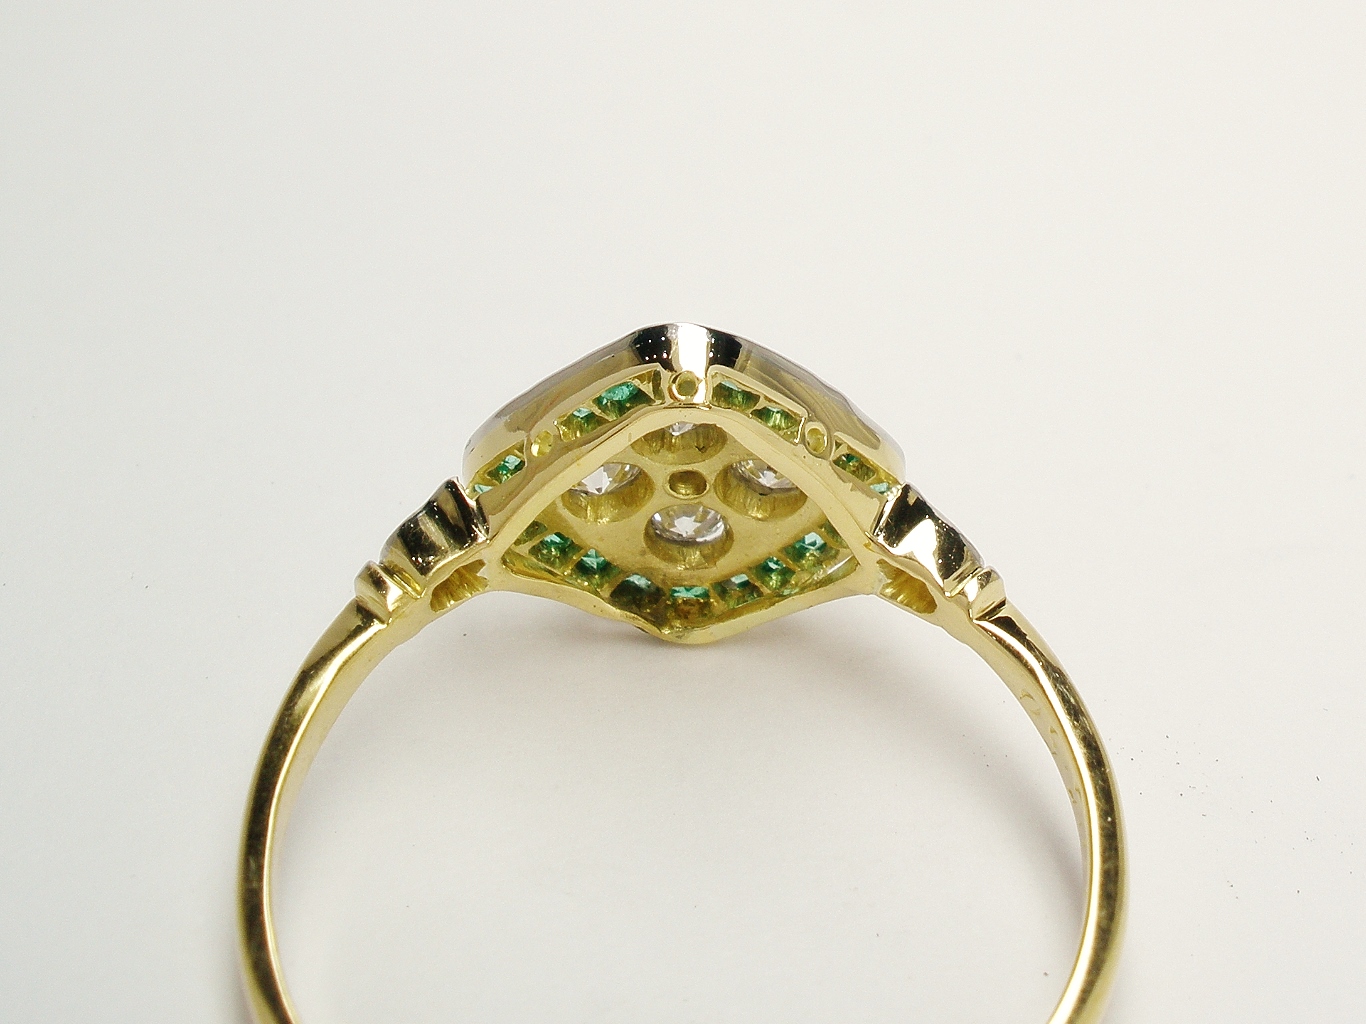 The 18ct. yellow gold back rail repaired and built up and the very fine platinum setting replaced & the emeralds reset.